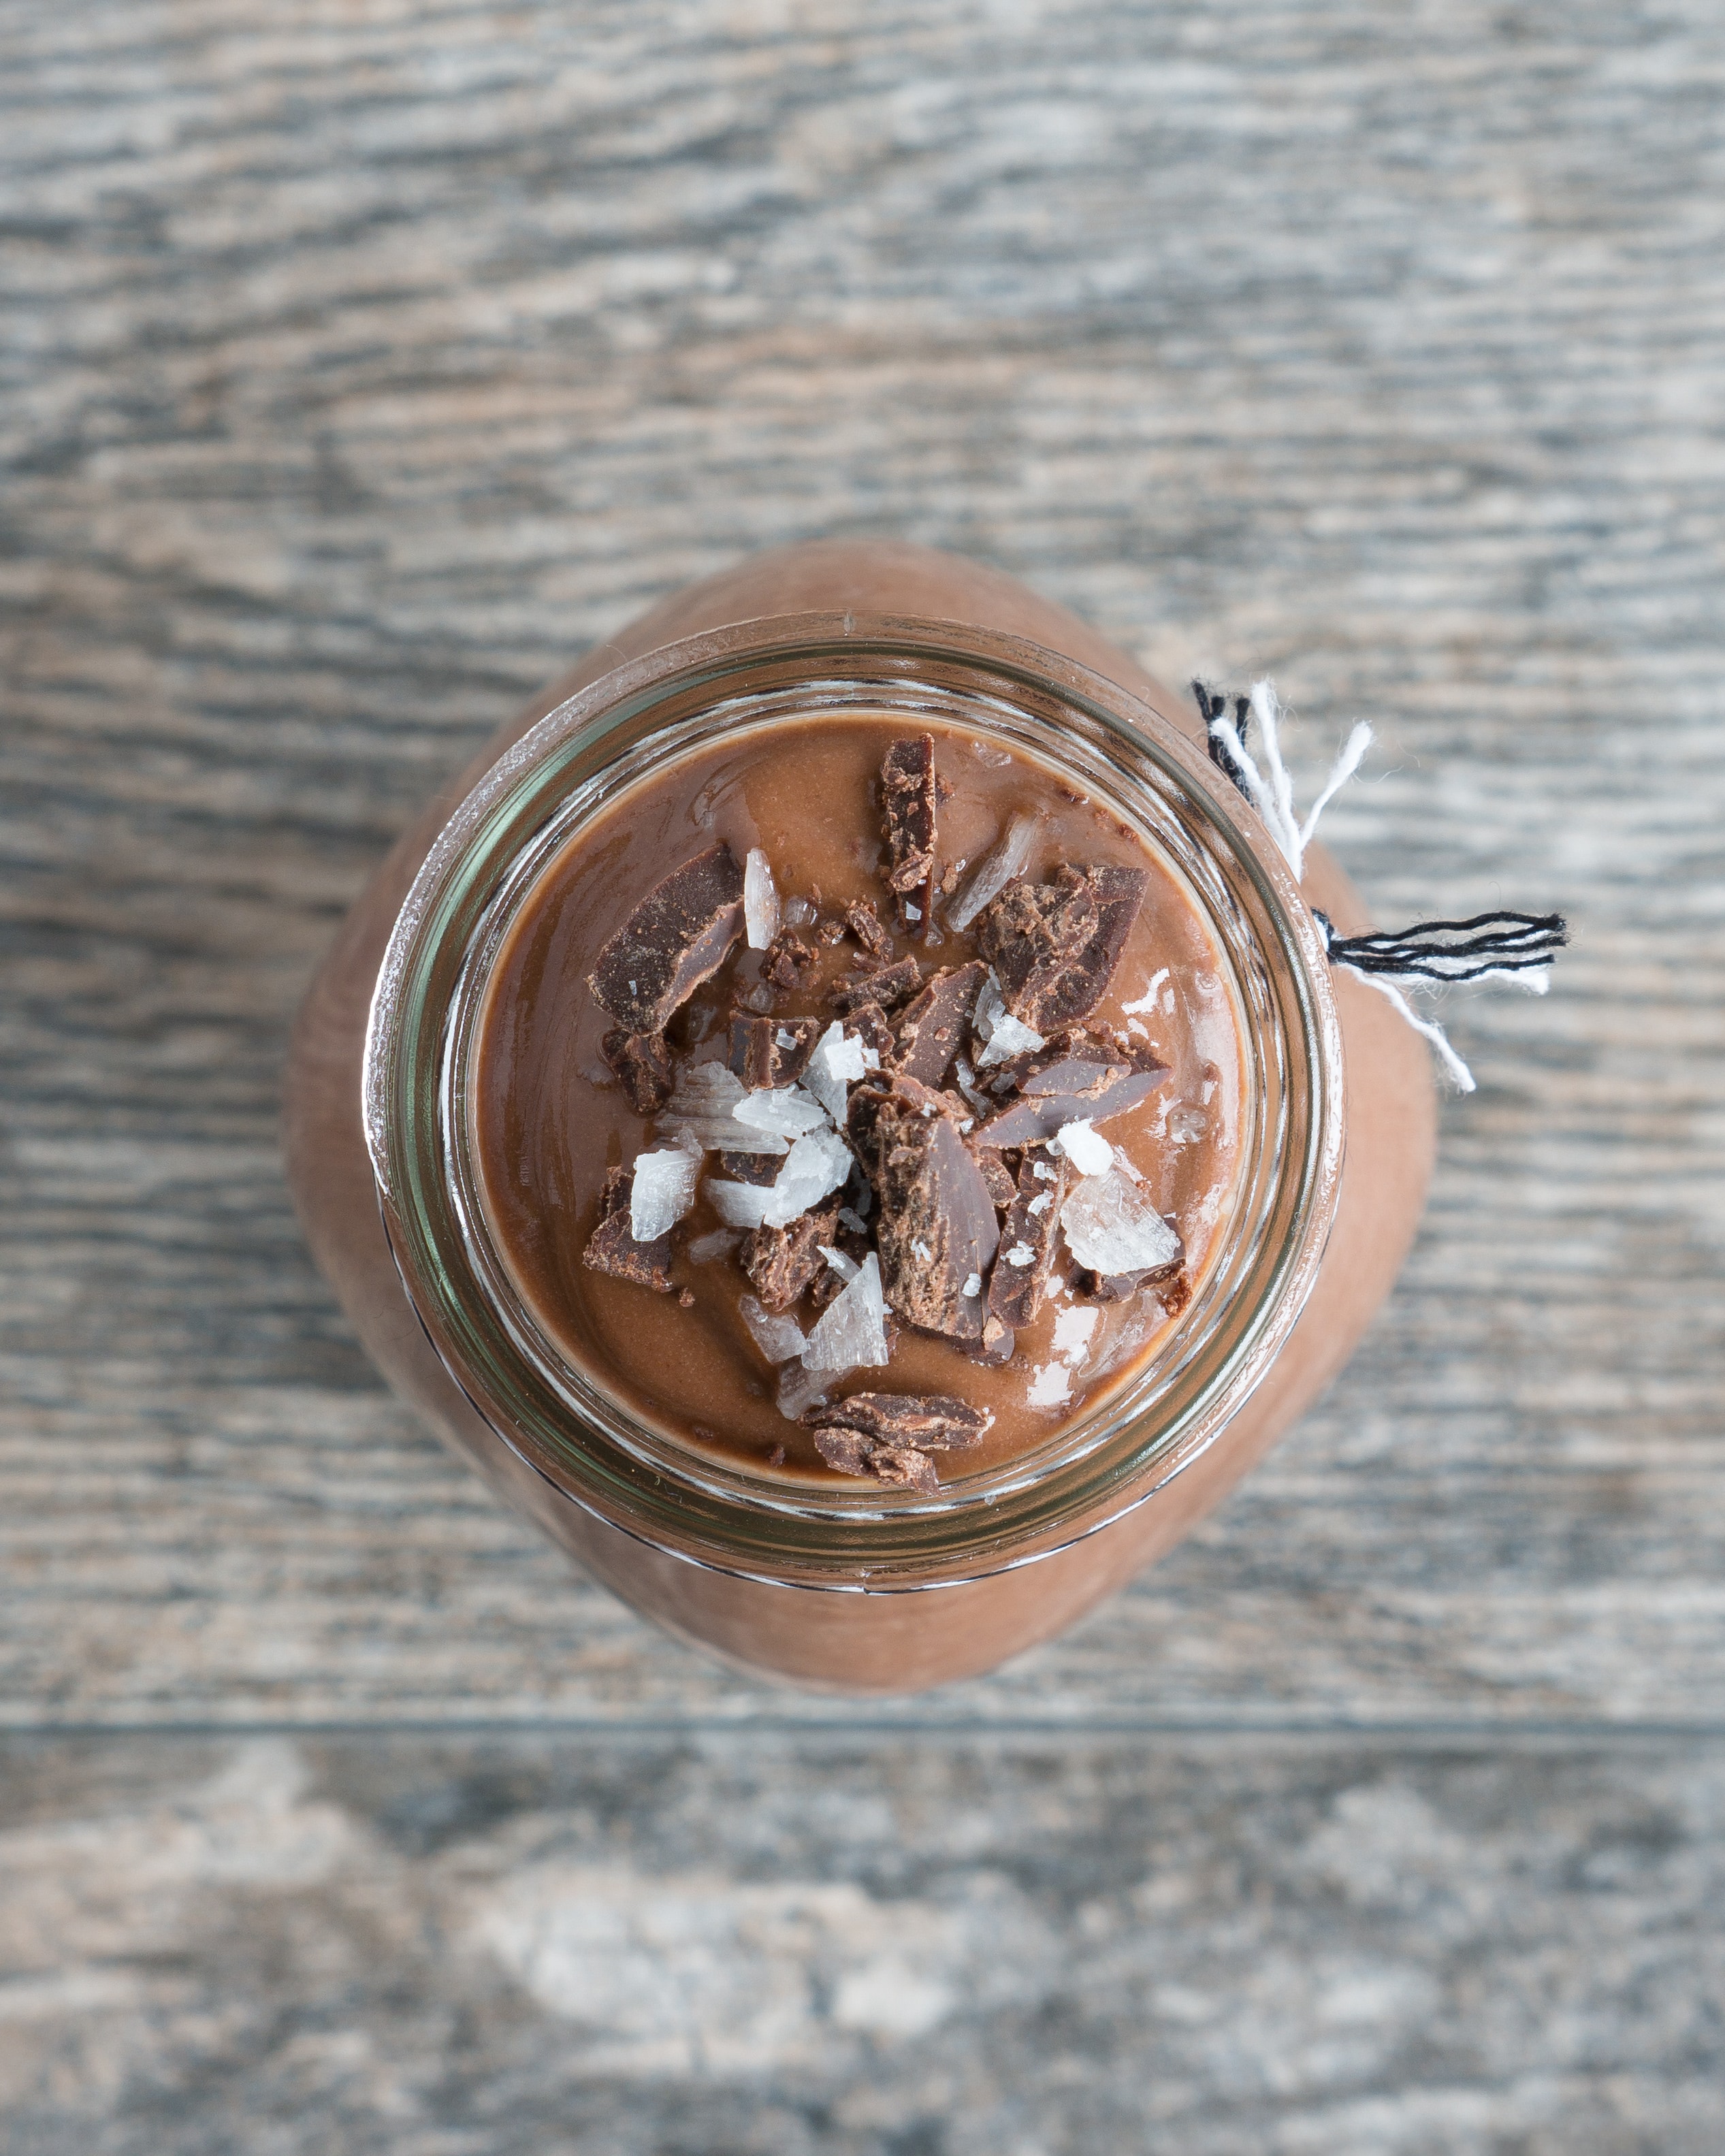 Glass of chocolate banana smoothie with chocolate shavings and salt on top with a wood background